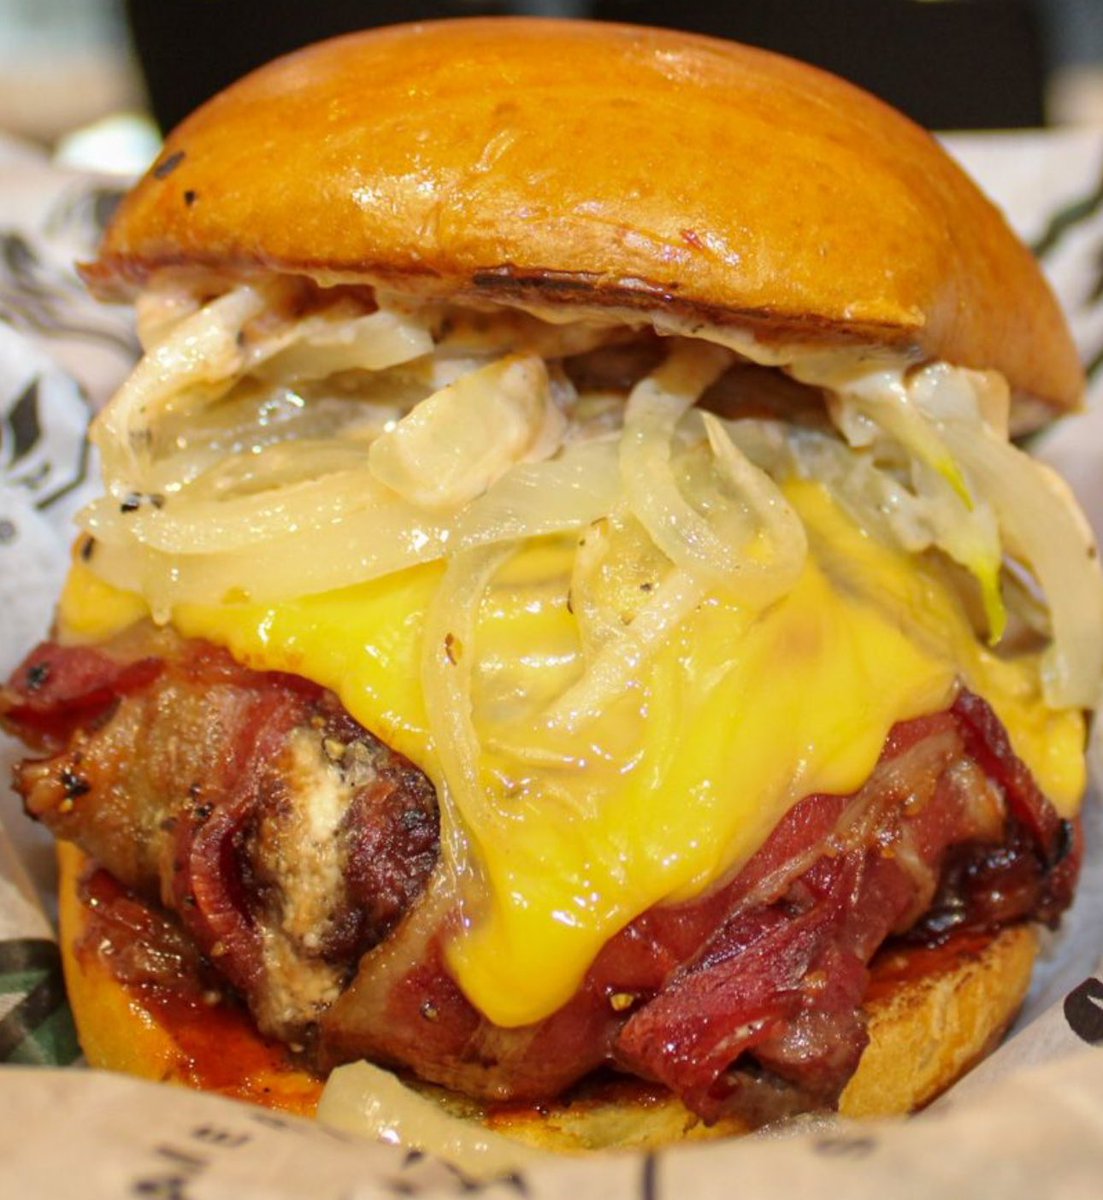 New for @dallasmavs & @DallasStars playoff games: Smoked Bacon-Wrapped Juicy Lucy Burger stuffed with jalapeño popper cheese filling, wrapped in bacon, topped with grilled onions, BBQ bacon aioli & cheddar cheese